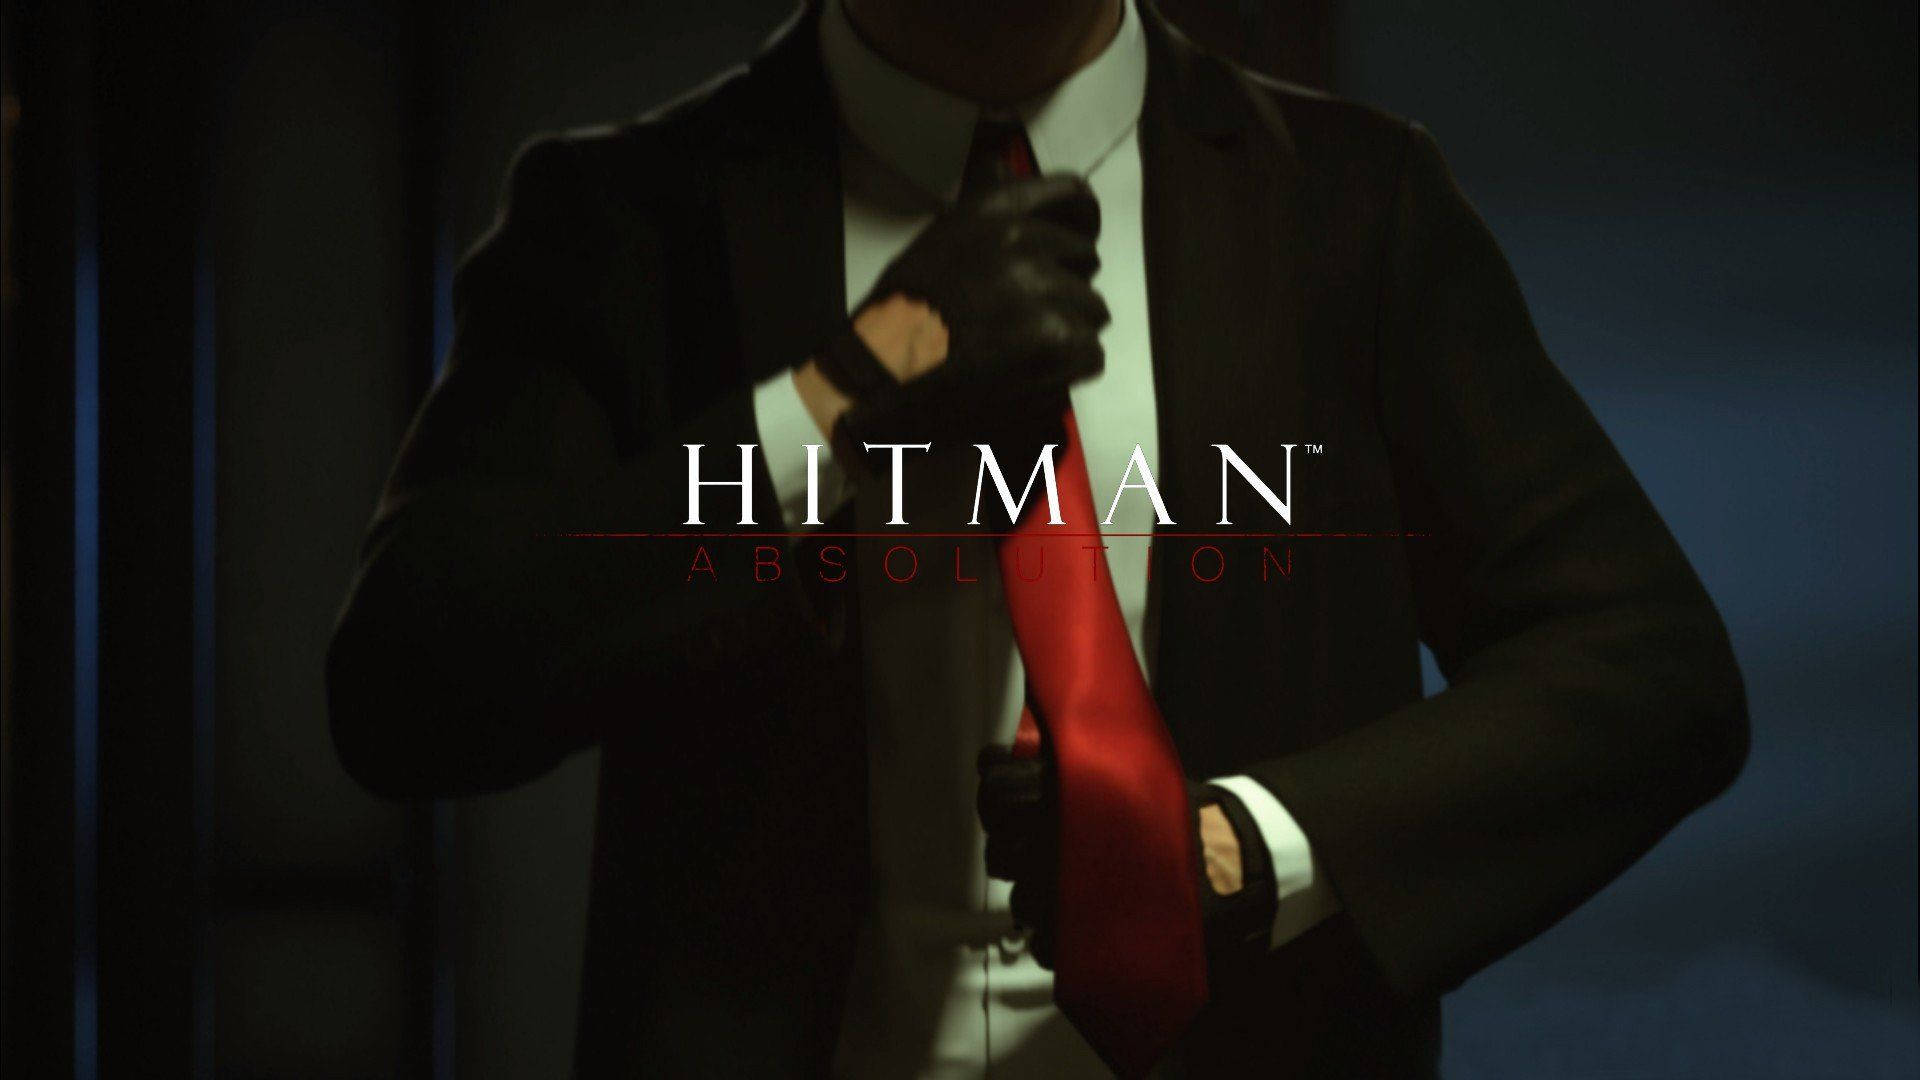 Hitman Absolution Game Title Poster Wallpaper